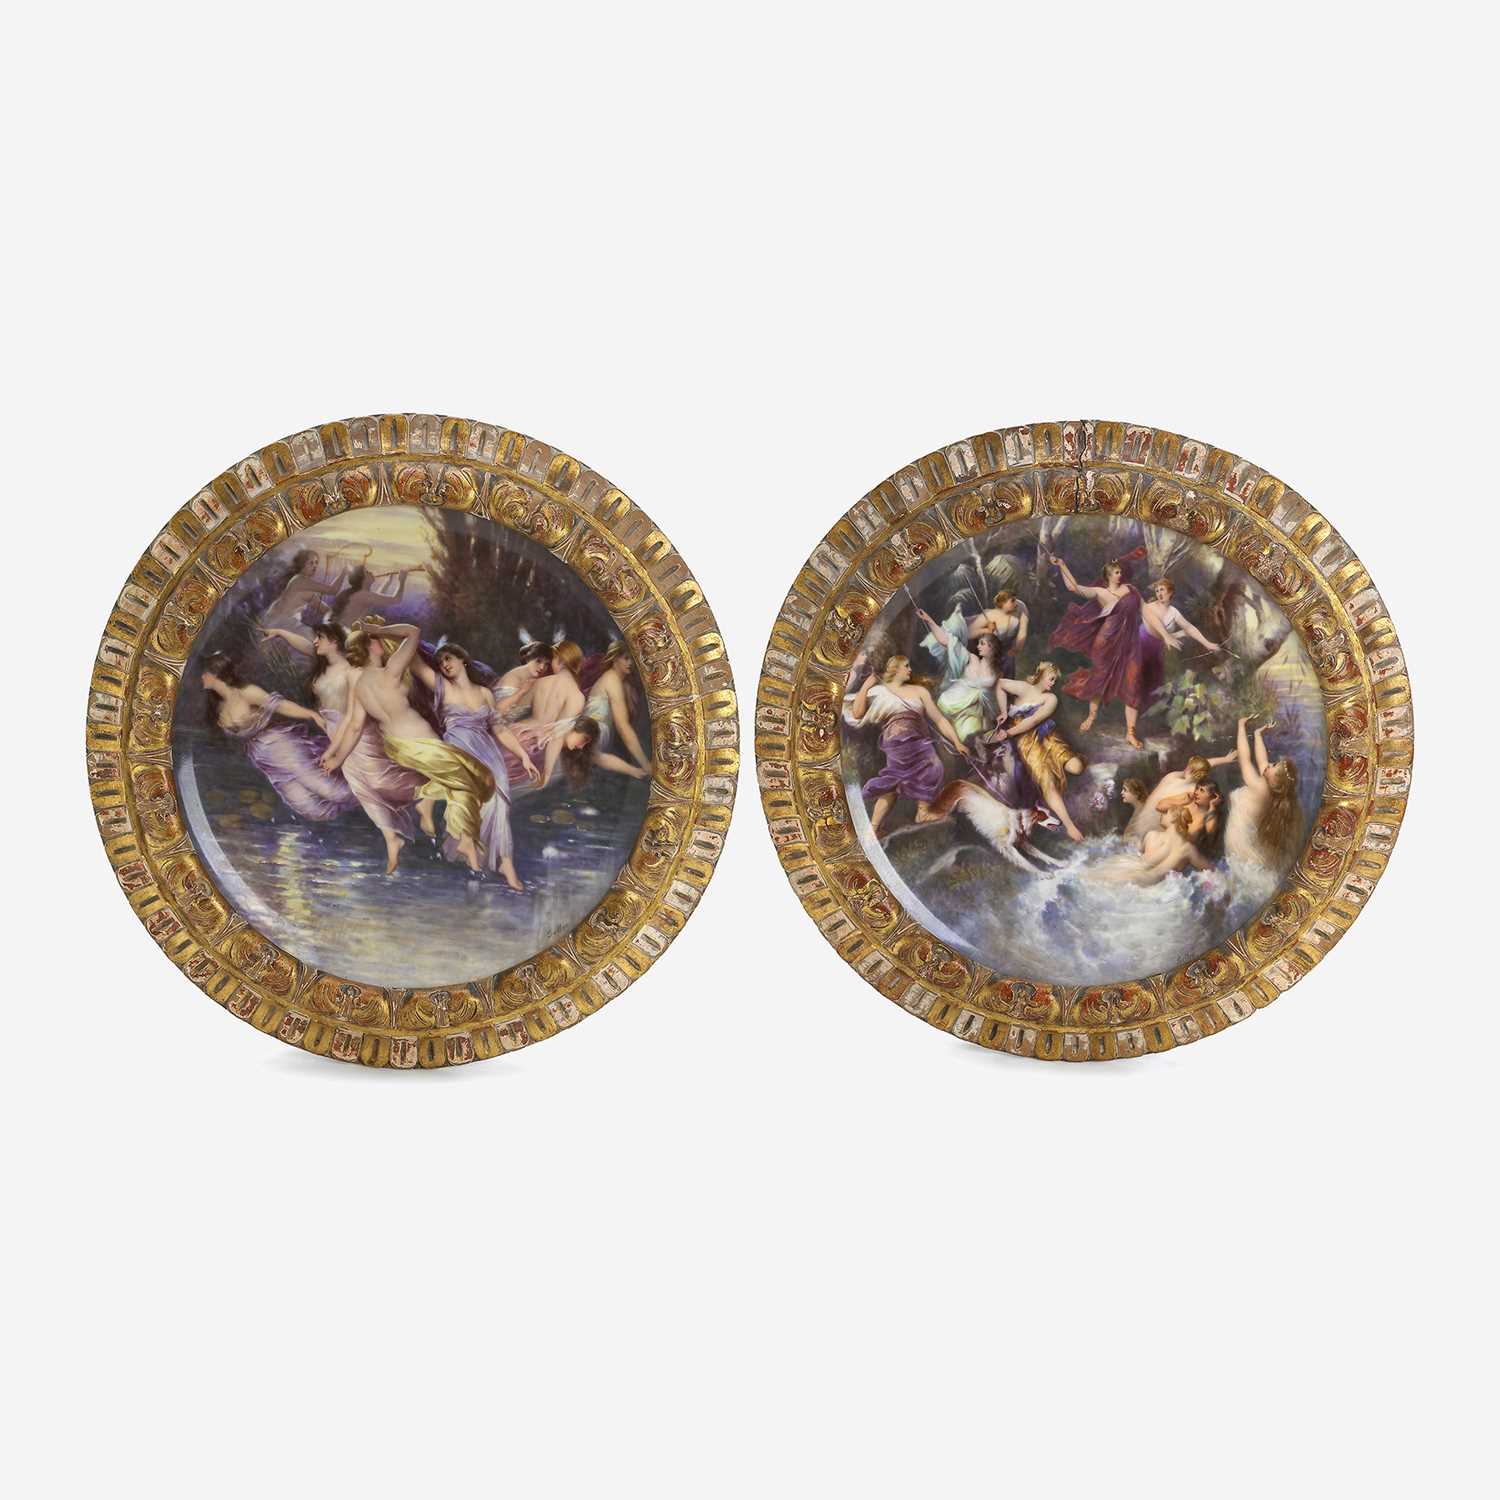 Lot 163 - A Pair of Vienna Porcelain Hand-Painted Roundel Plaques